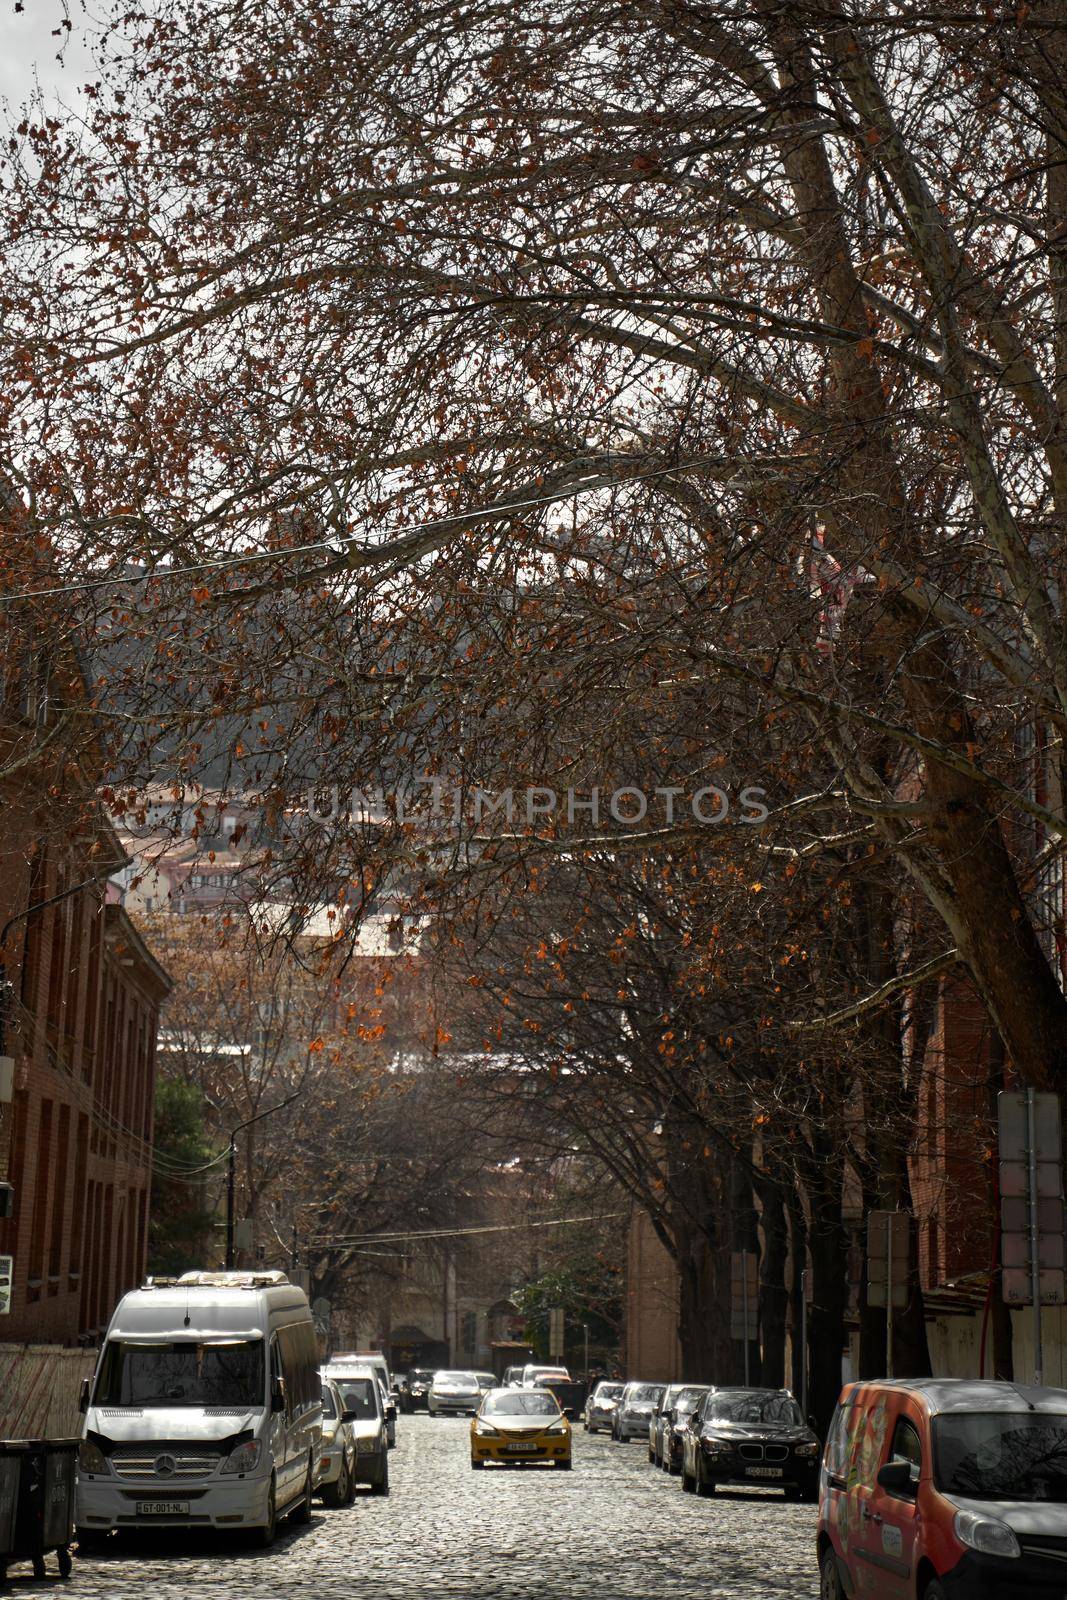 The street on which cars go. City streets of the old district of Tbilisi.